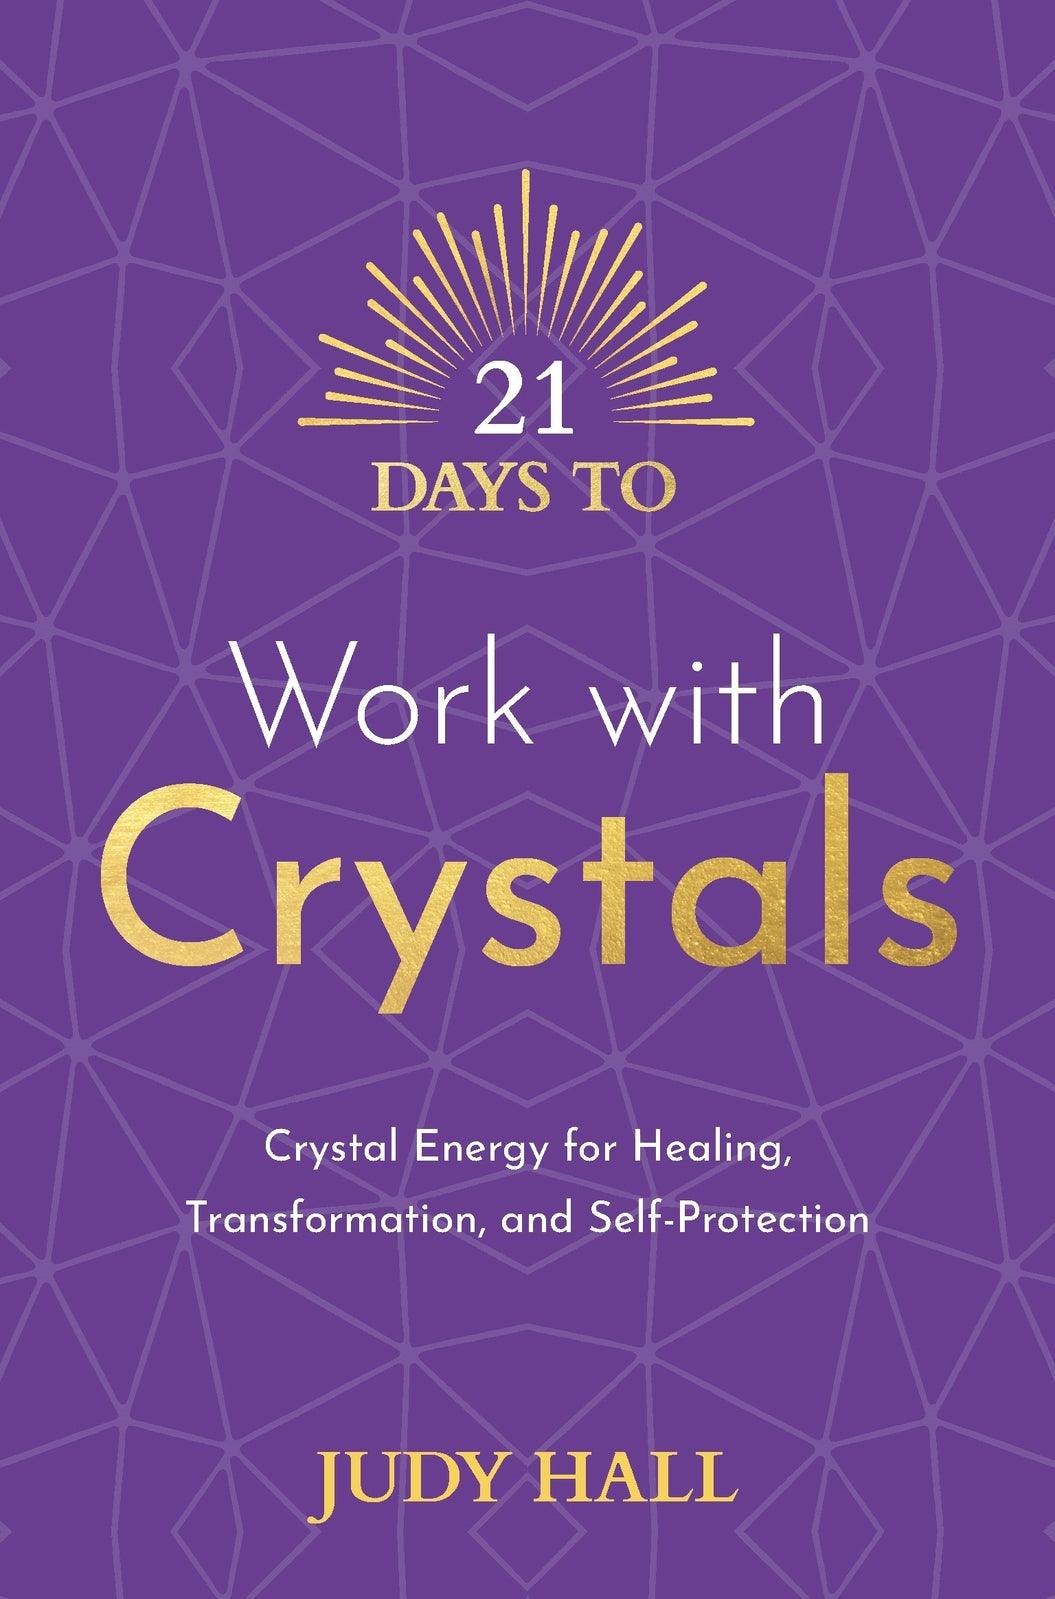 21 Days to Work with Crystals: Crystal Energy for Healing, Transformation, and Self-Protection - Inspire Me Naturally 